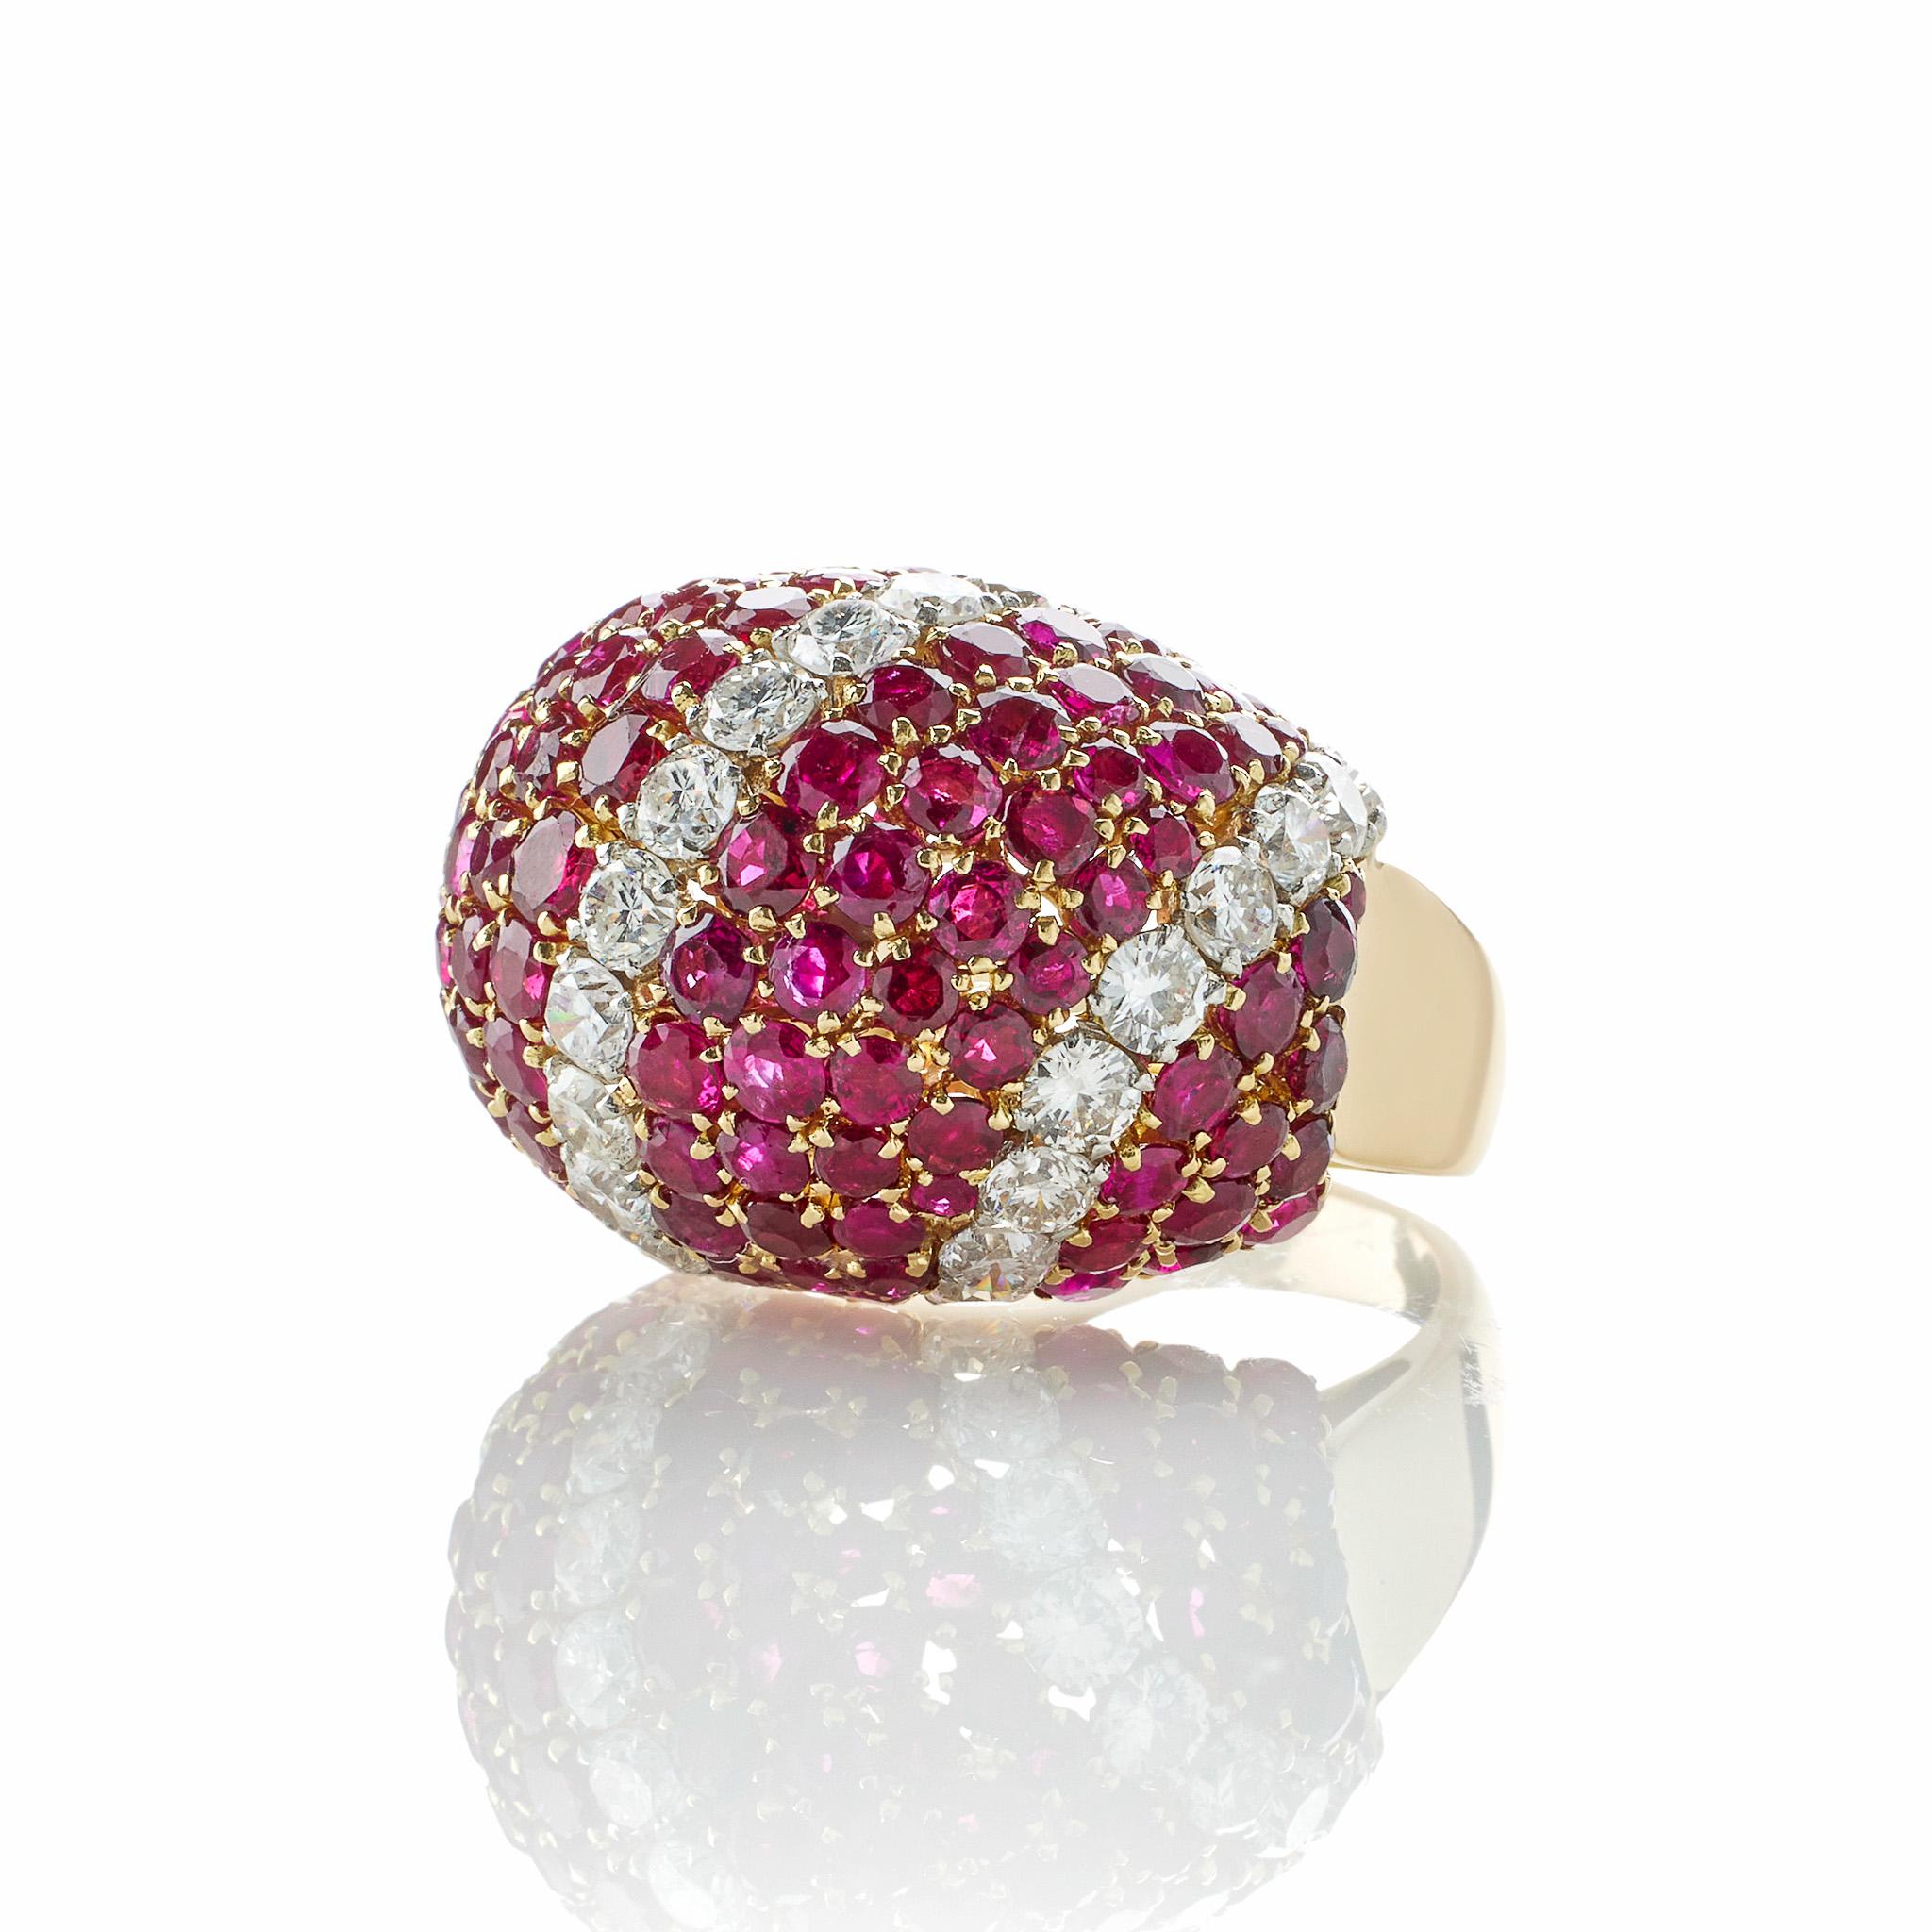 Van Cleef & Arpels Paris Ruby and Diamond Bombé Ring In Excellent Condition For Sale In New York, NY